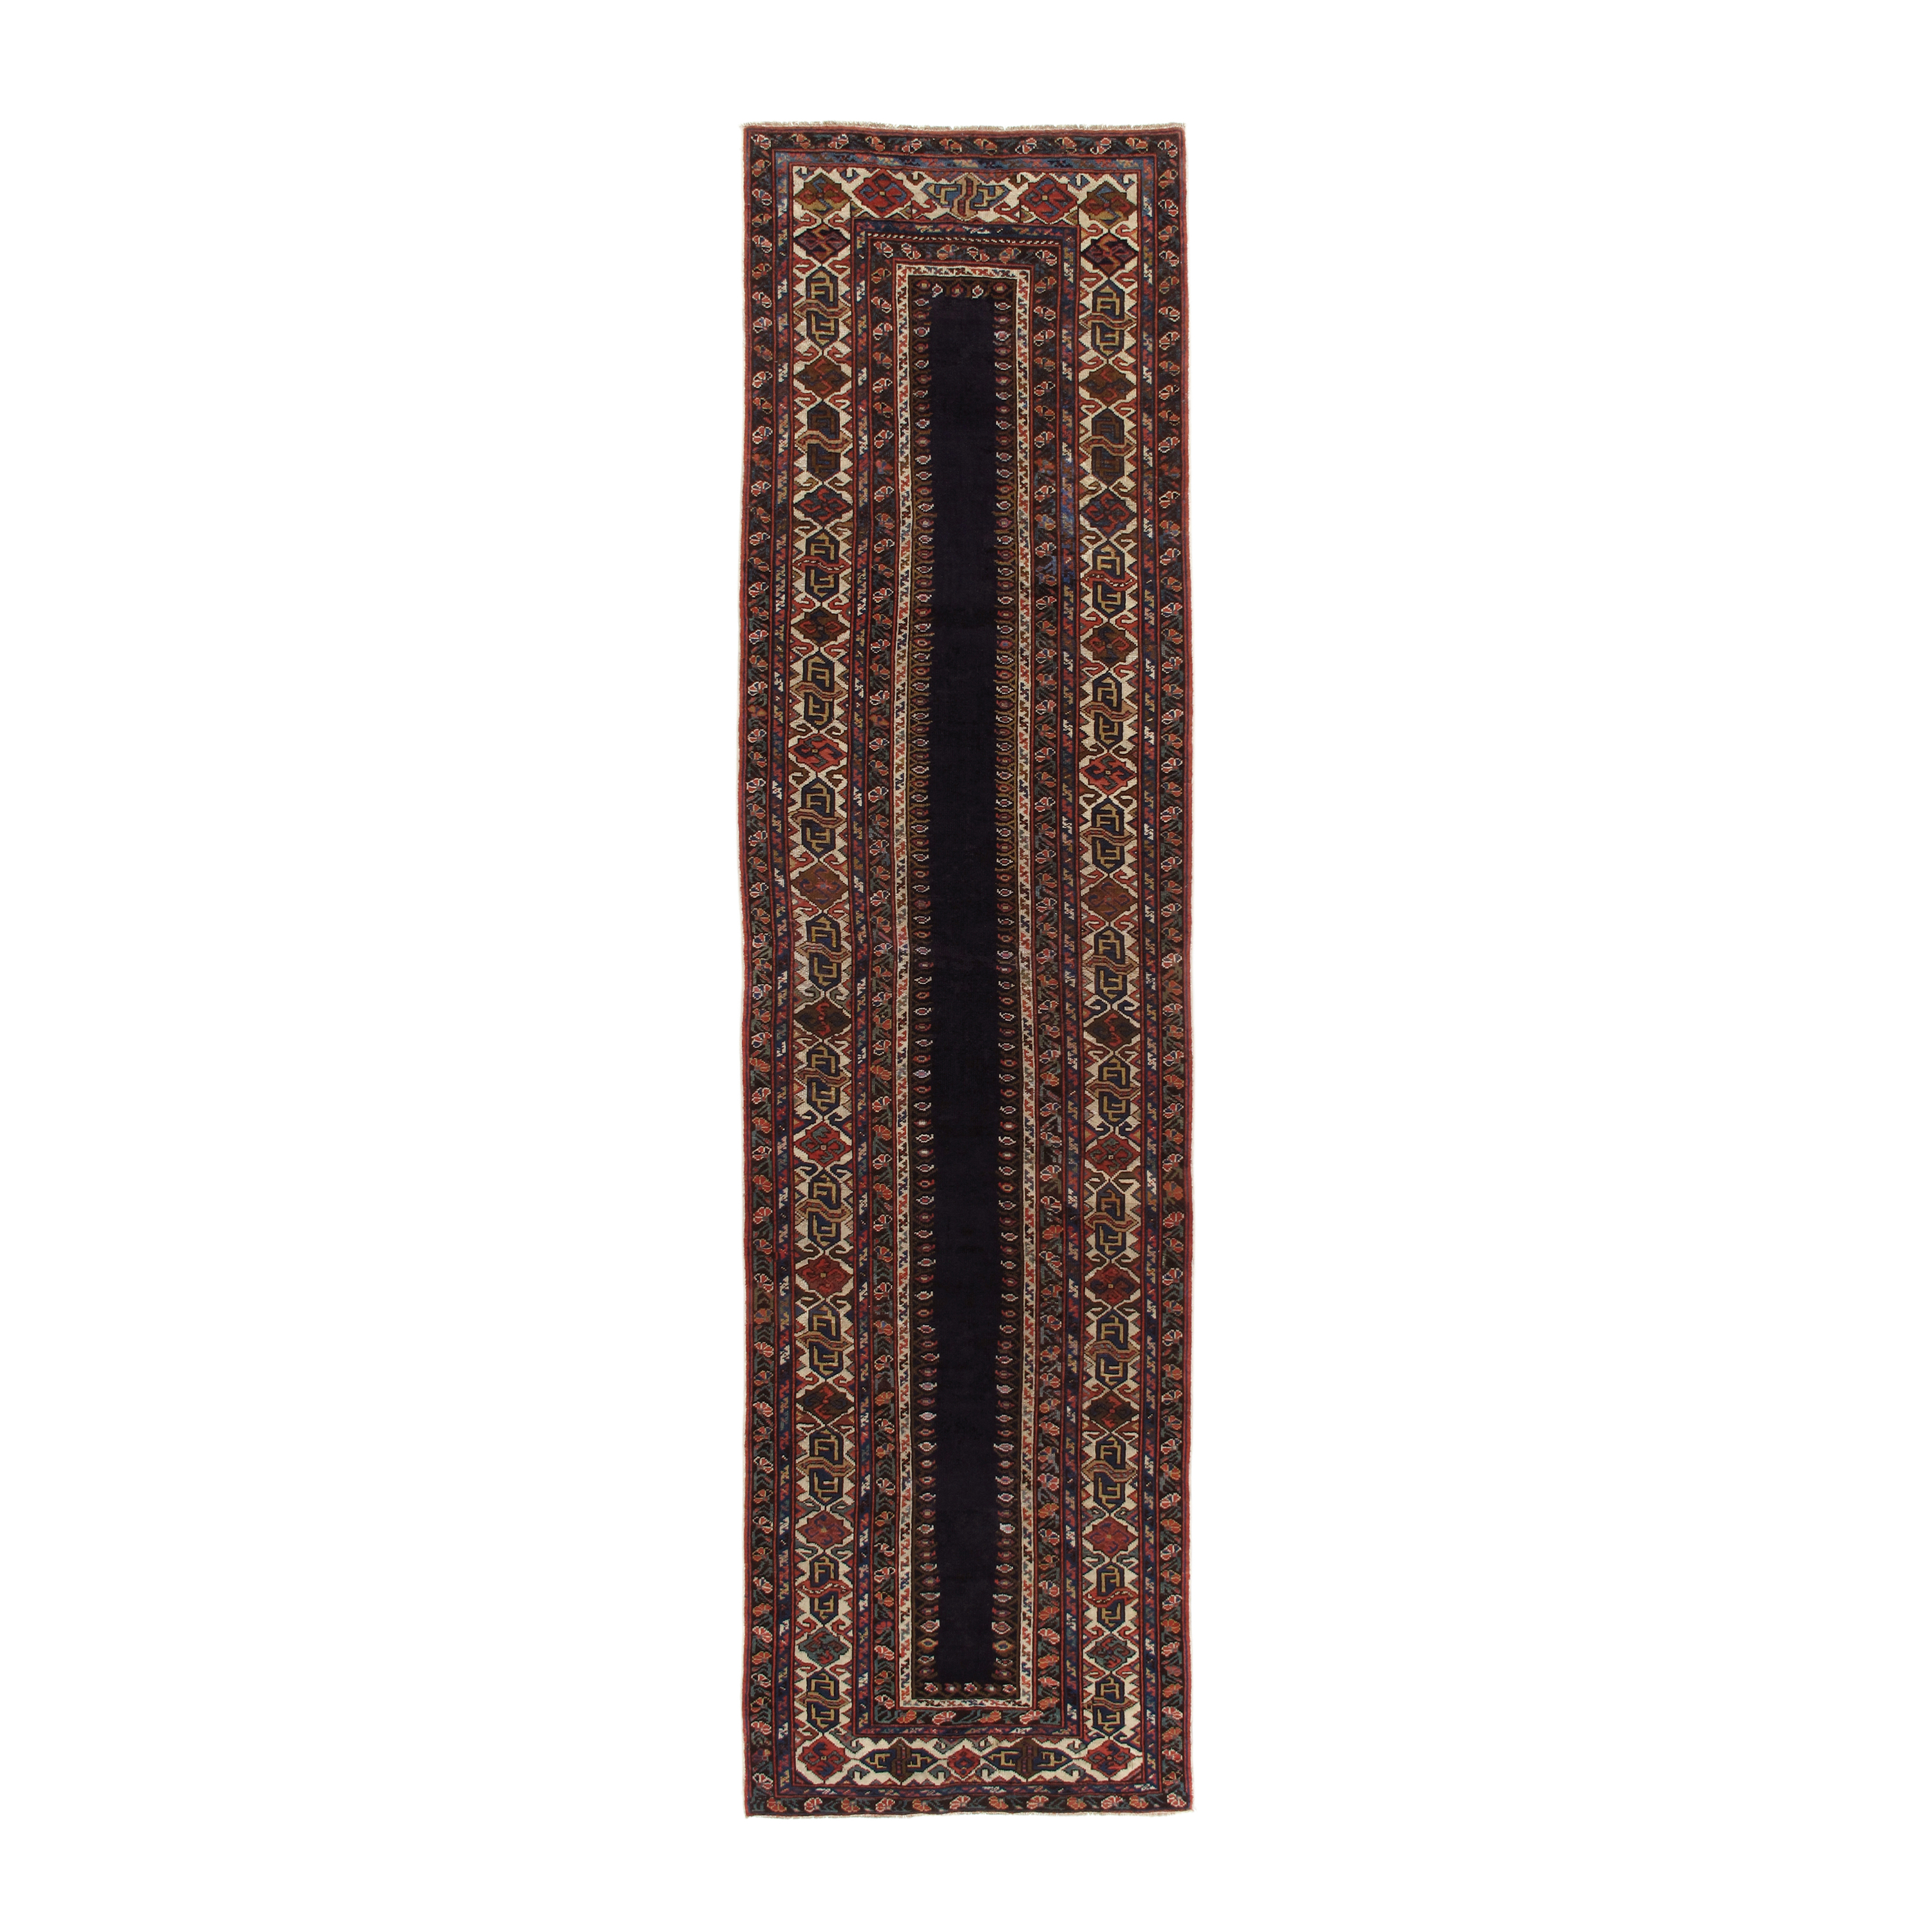 This Talish rug is hand-knotted and made of 100% wool.